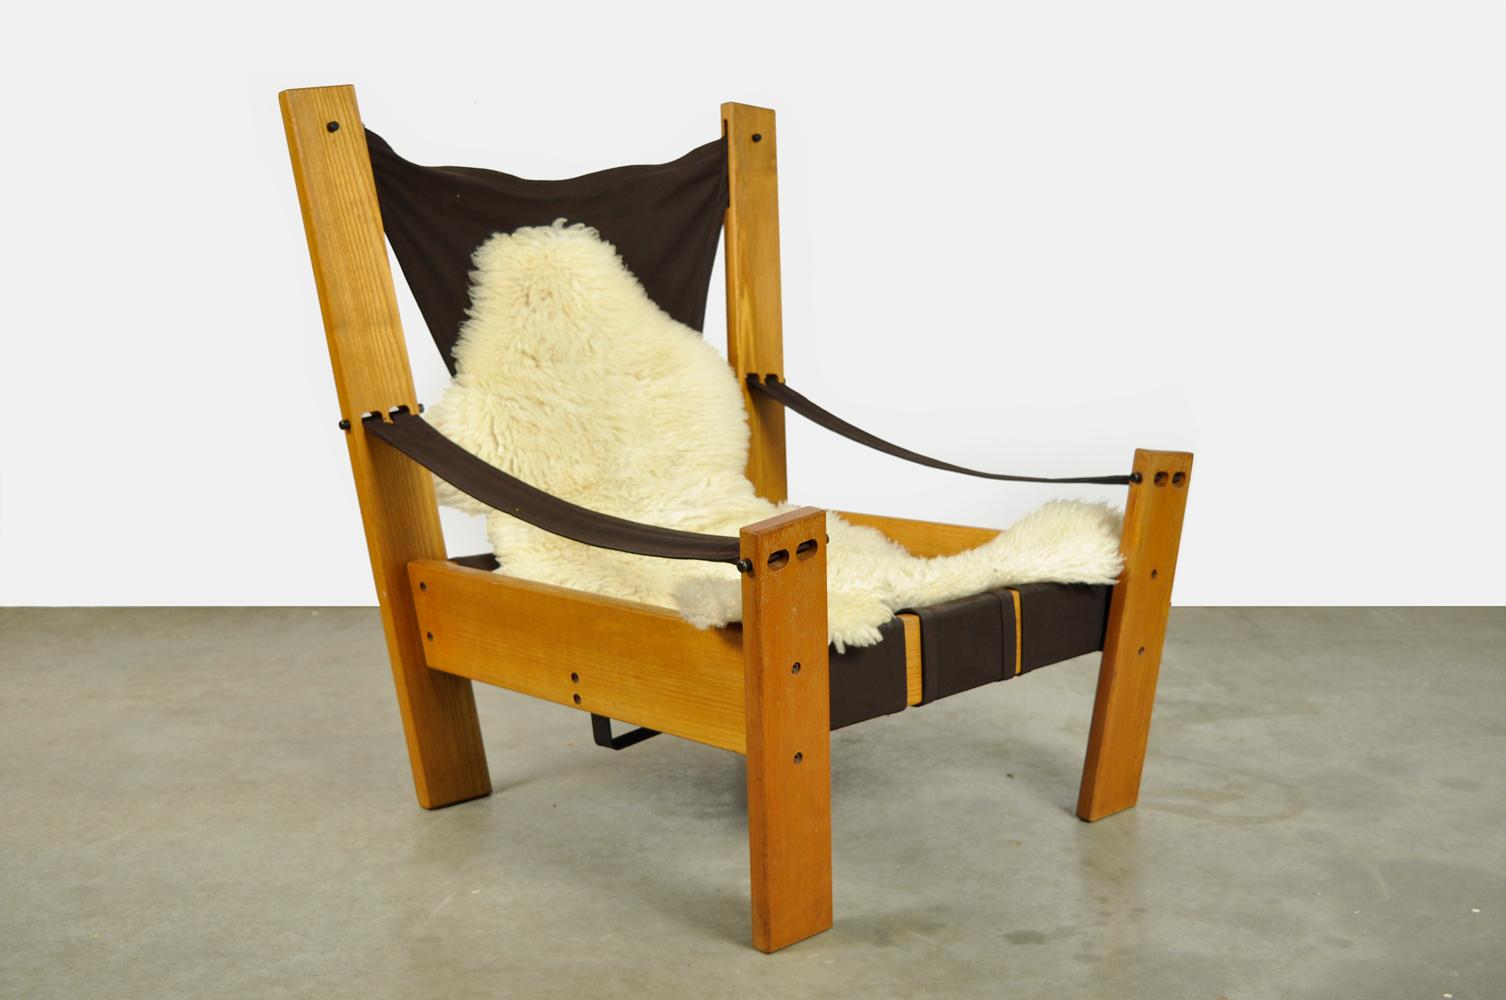 Special Dutch lounge armchair designed by John de Haard and produced by the Gebroeders Jonkers, 1960s. The unique armchair has a pine wood frame with a hanging canvas seat. The “sling” armrests are of the same brown canvas. The seat is held in place